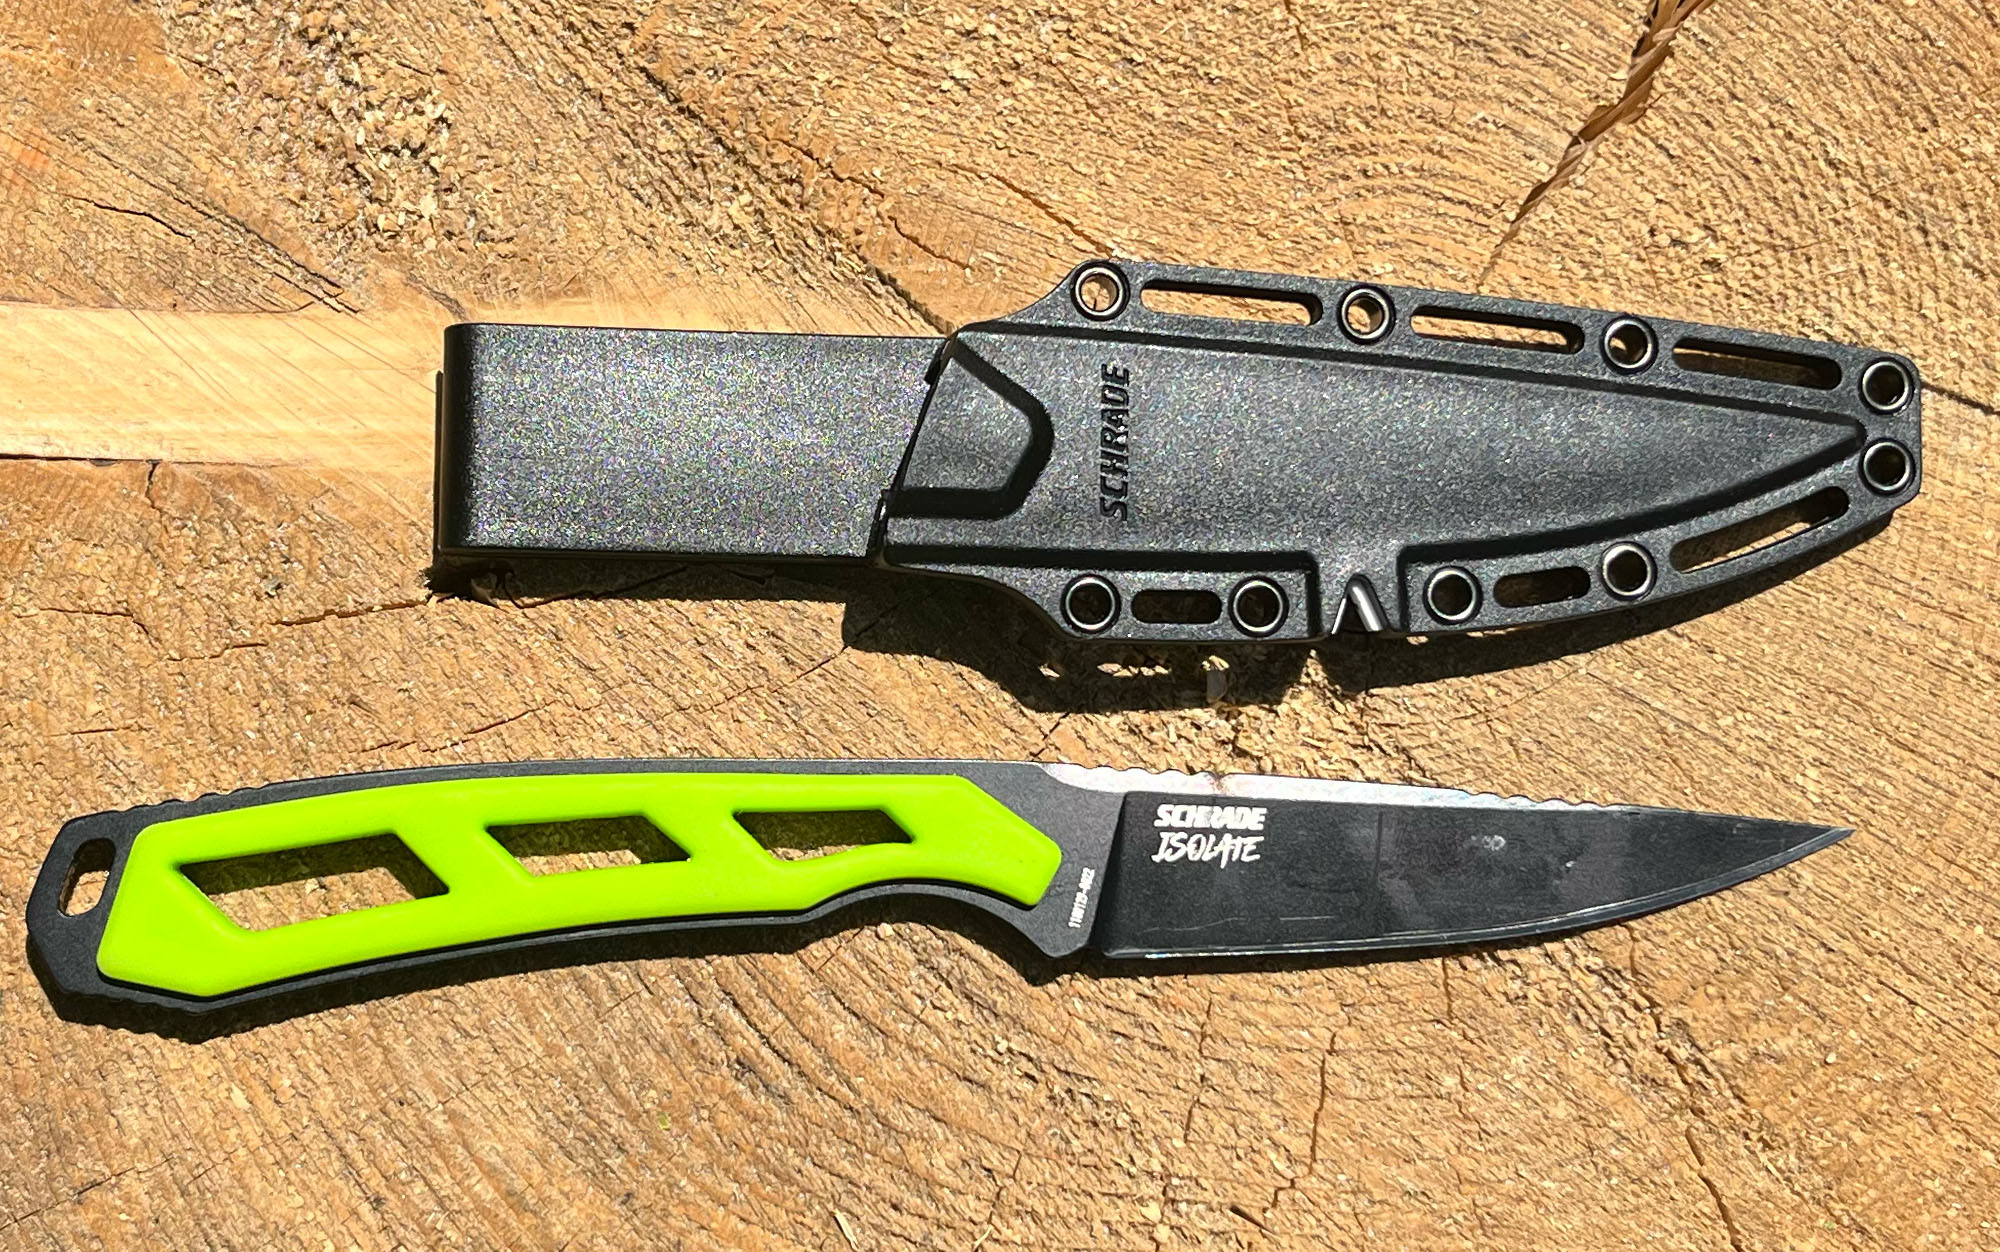 We tested the Schrade Isolate.